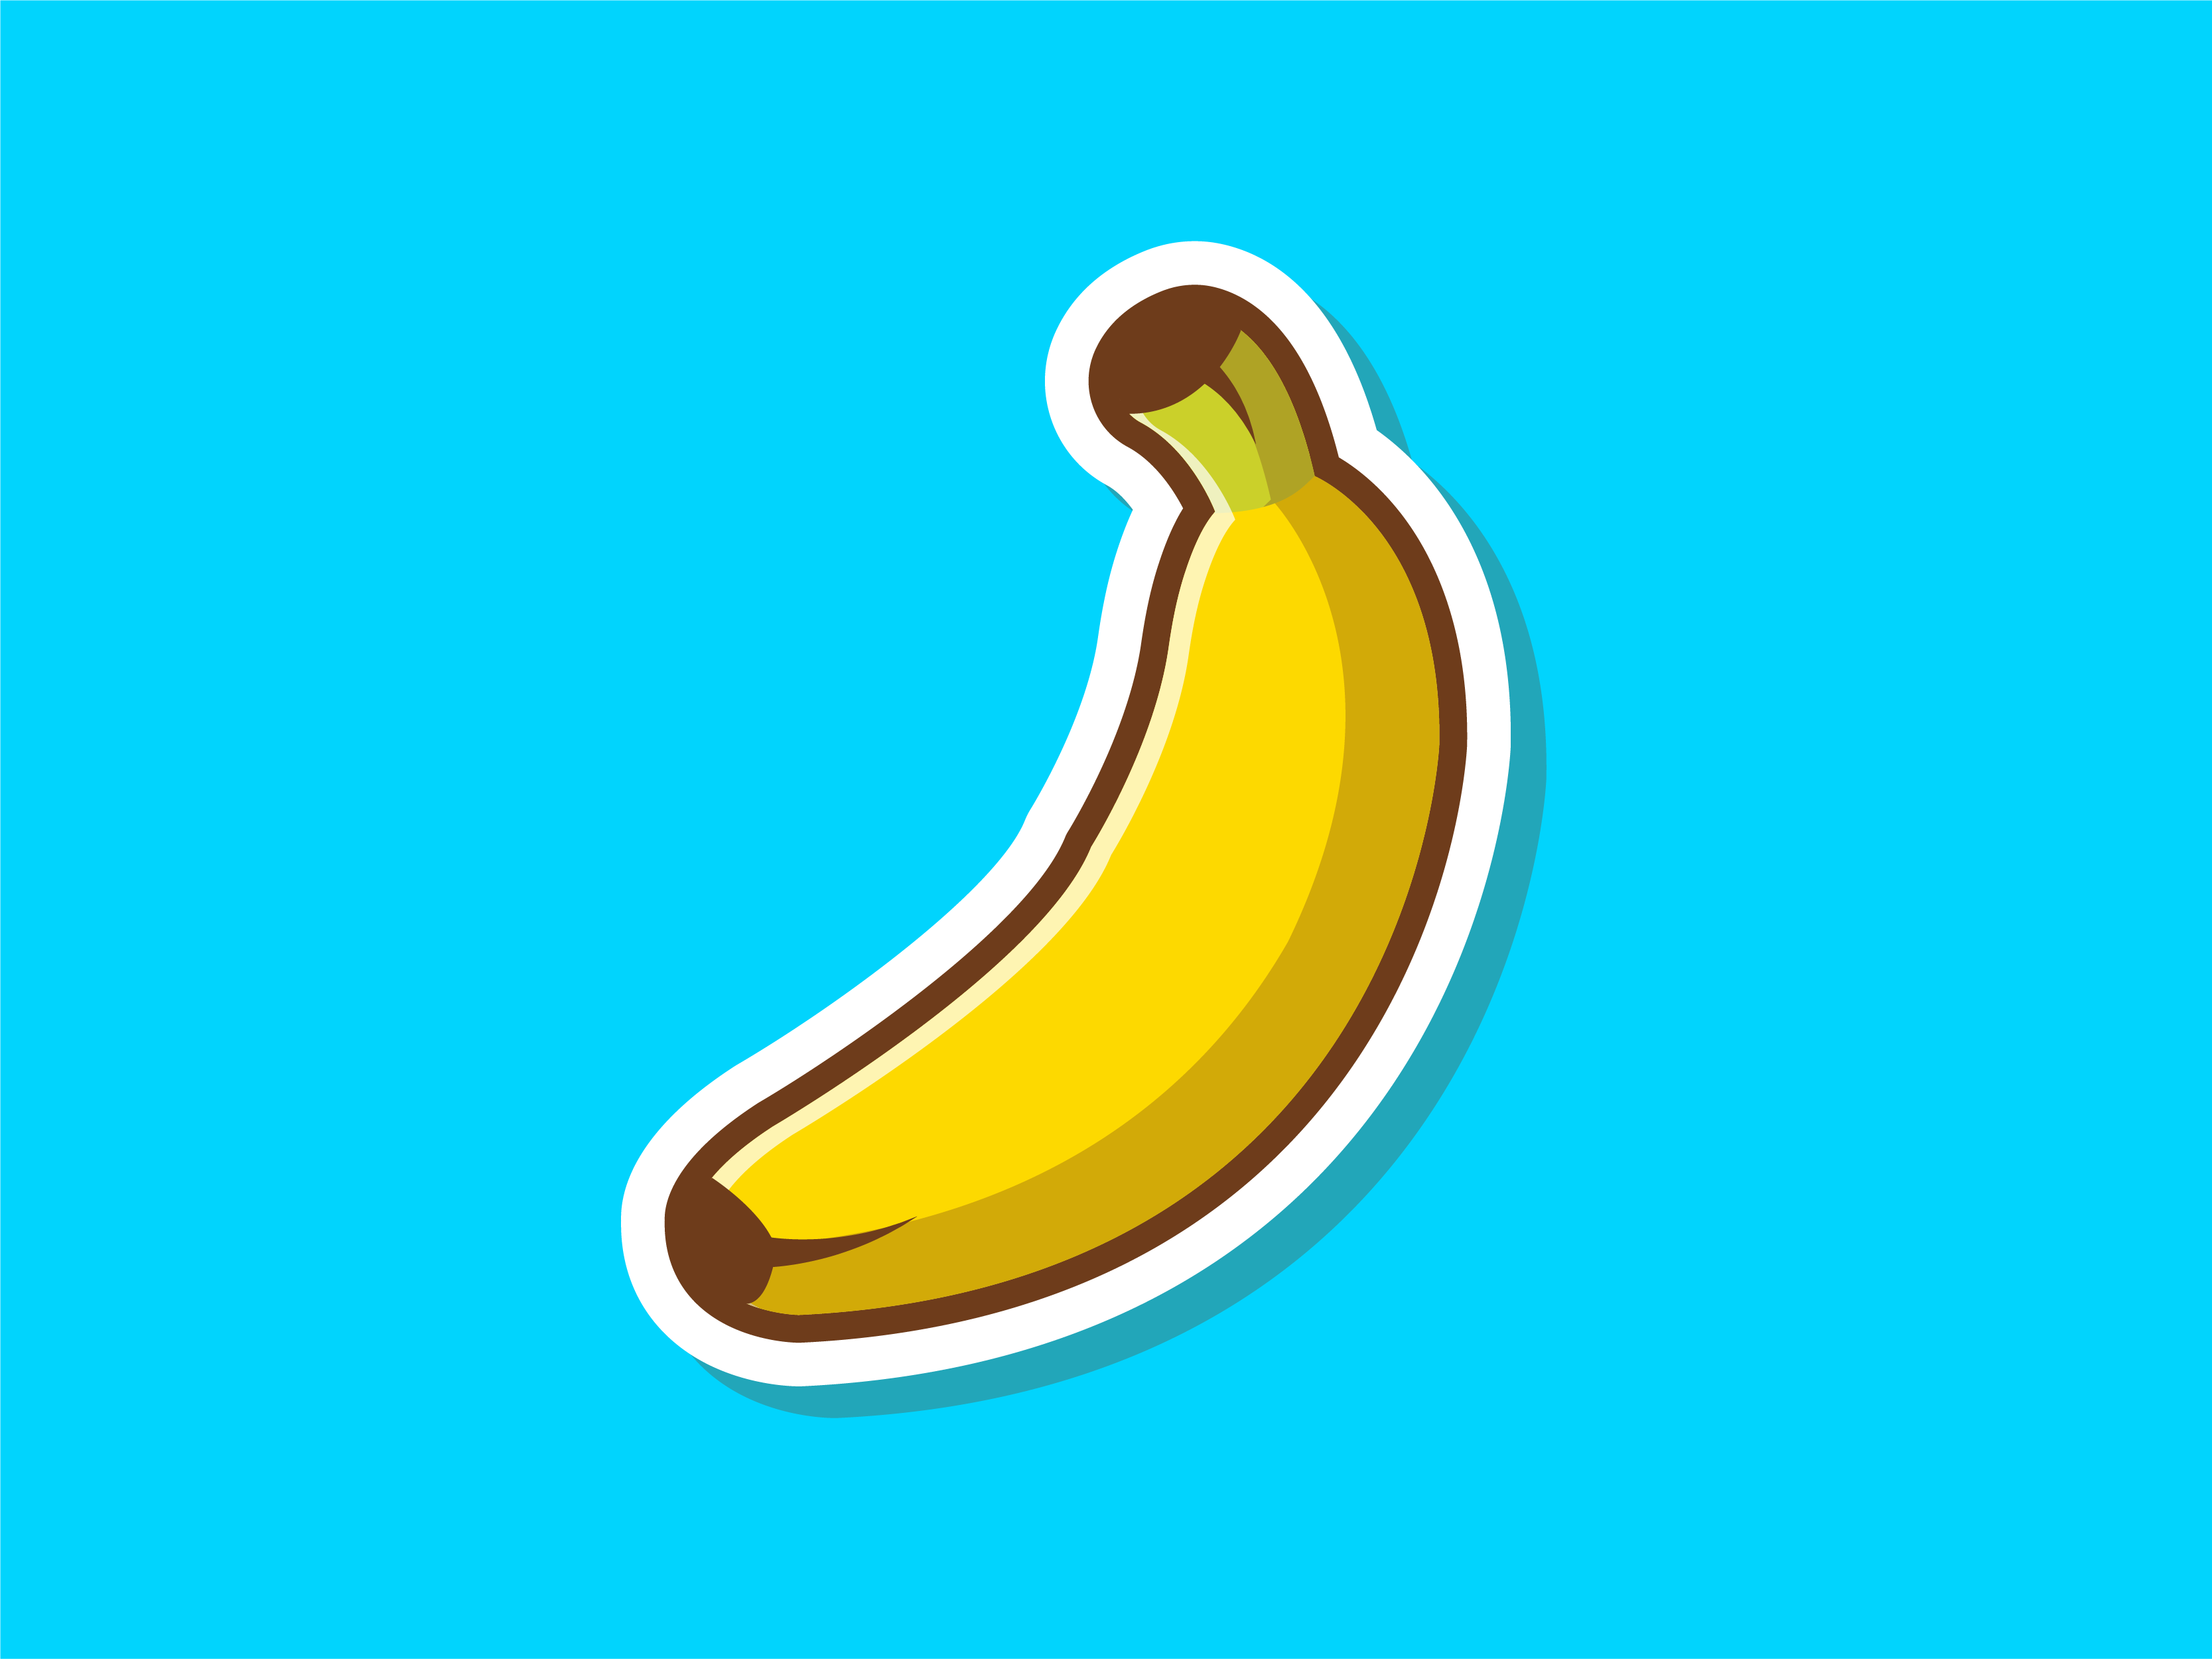 Dribbble - banana-06.png by catalyst